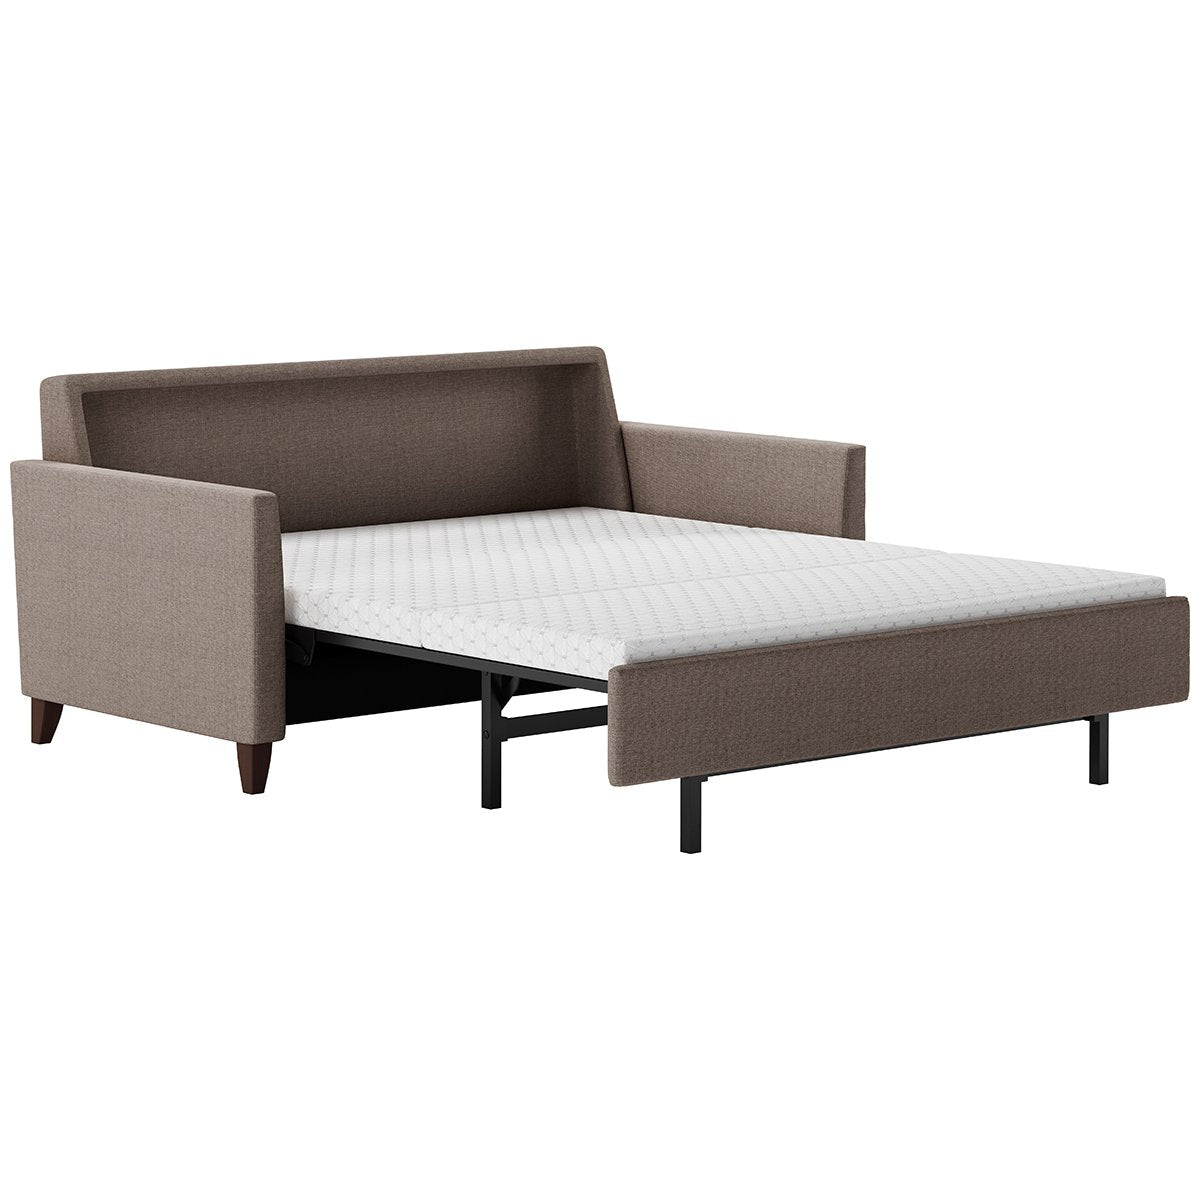 Harris Upholstery Comfort Sleeper by American Leather